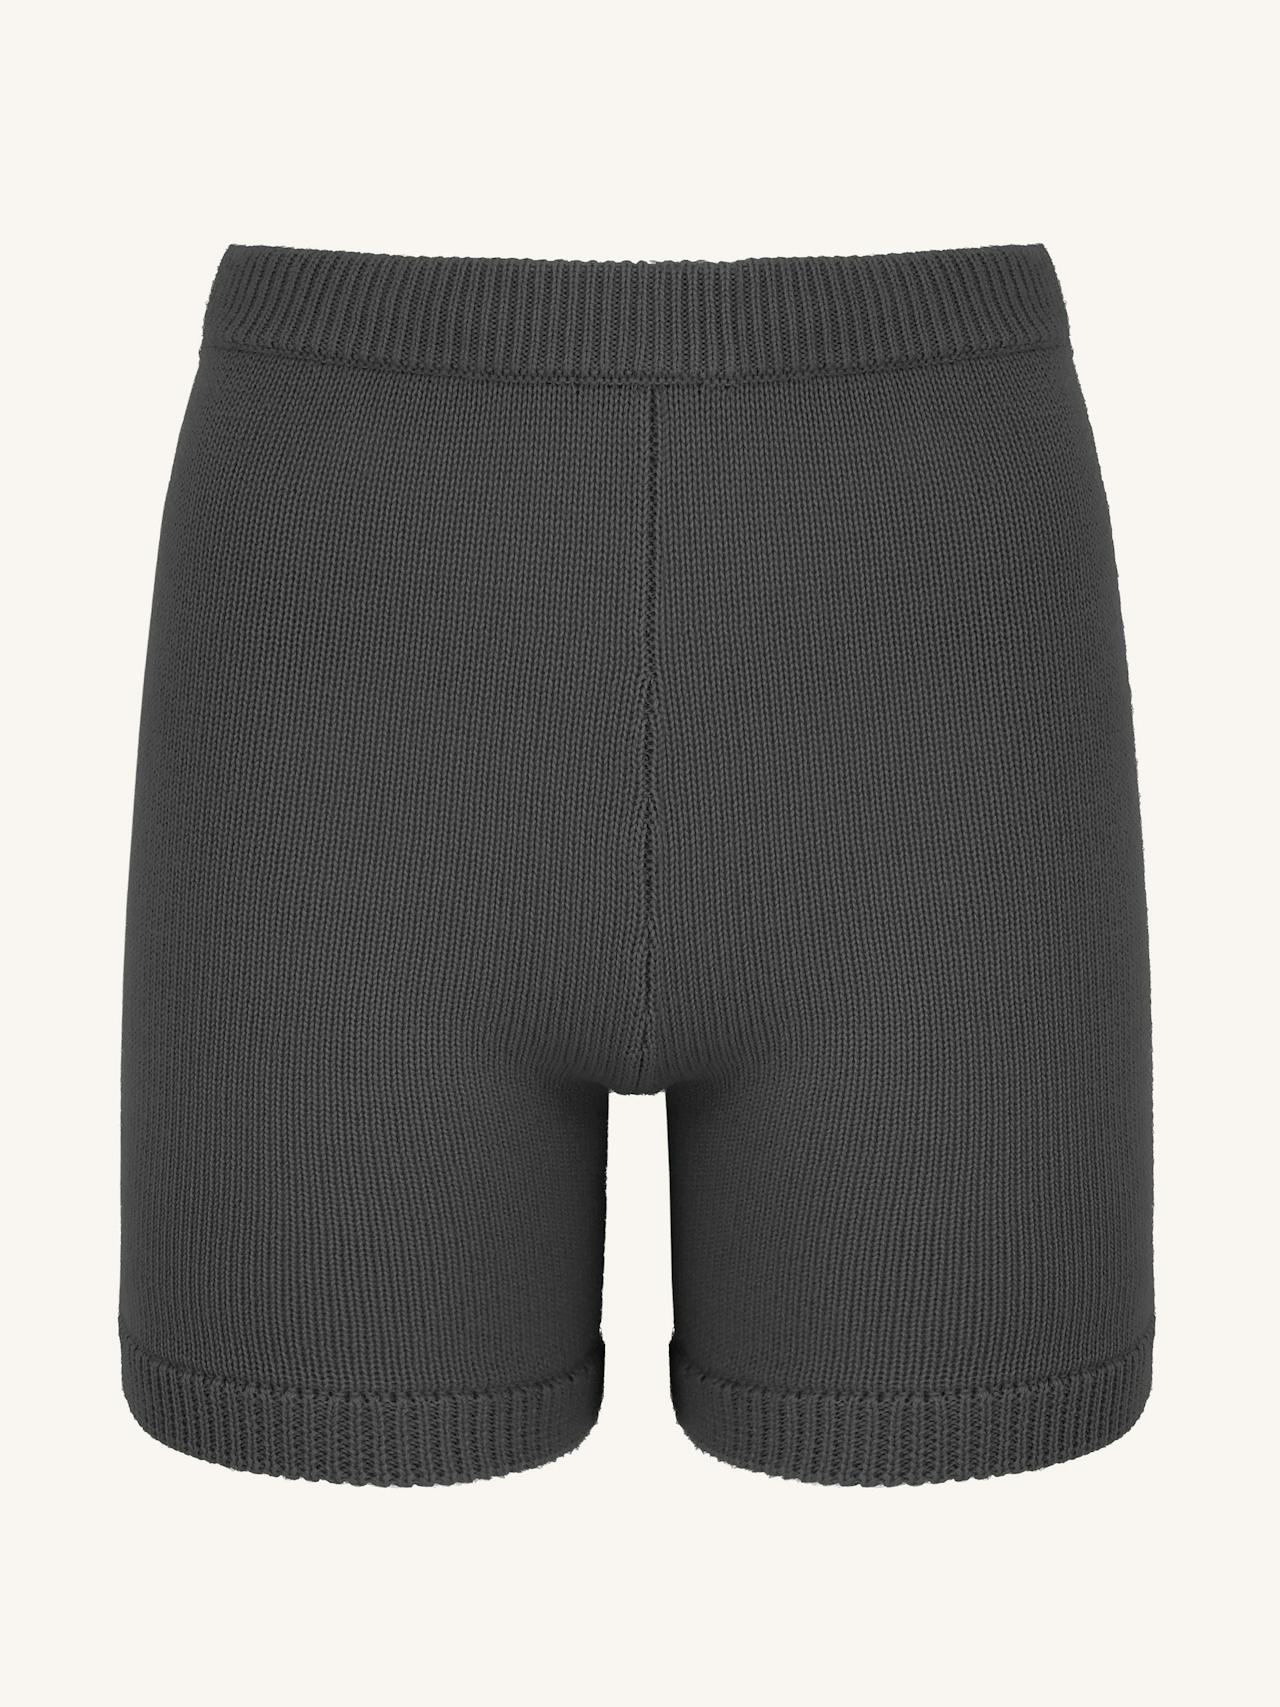 Alex black knitted cycling shorts